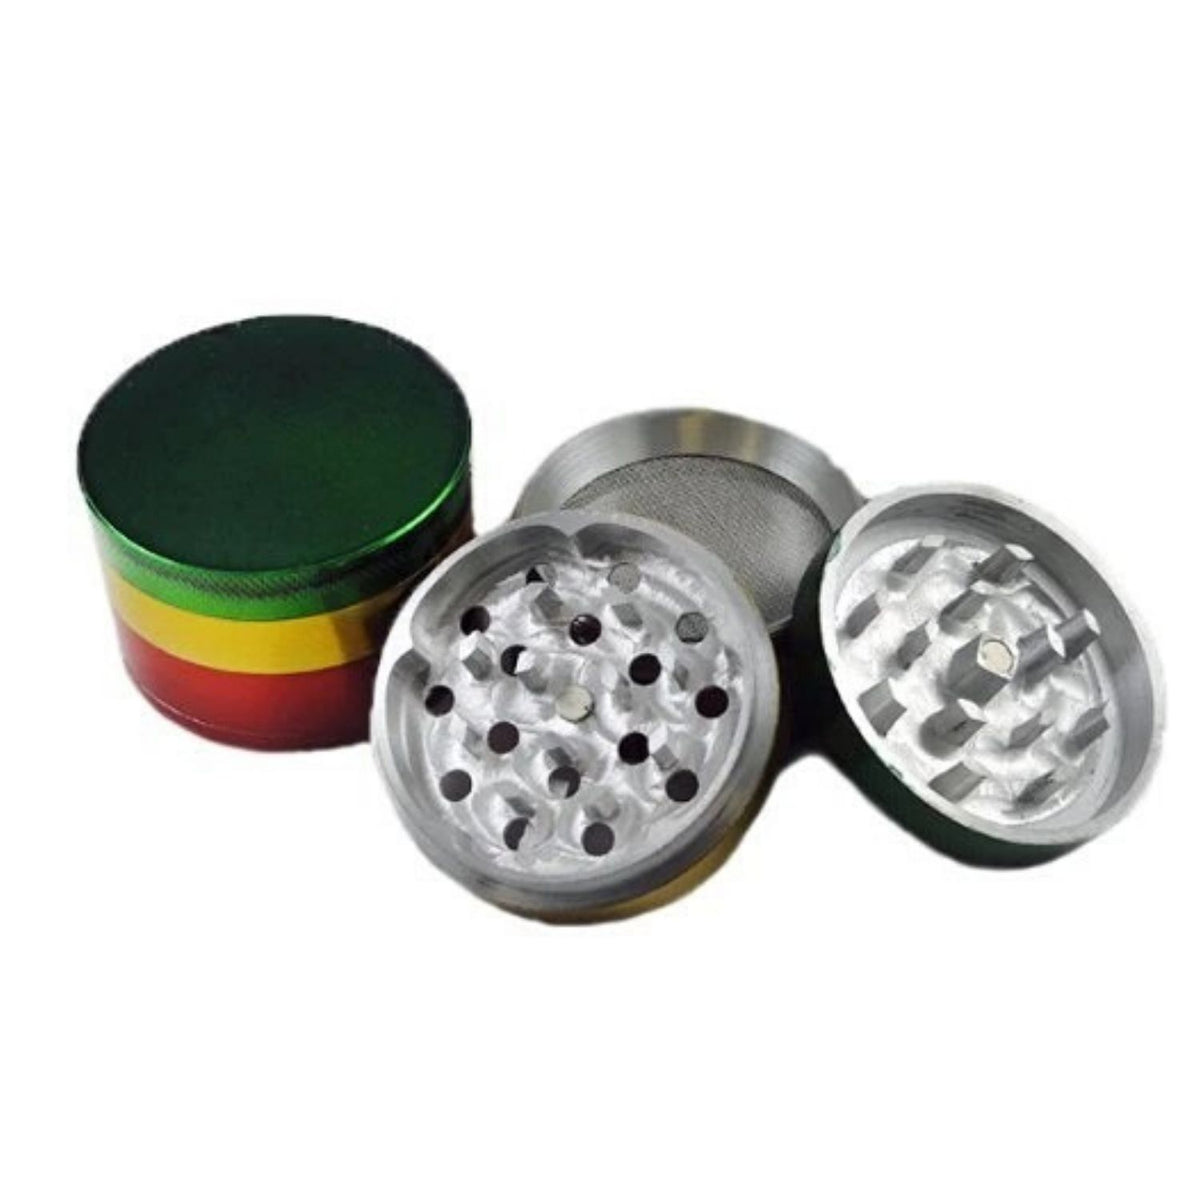 Buy Outontrip Classic Metallic Herb Crusher/Grinder Large with filter (Herb  grinder/herb crusher 52 mm) Online at Low Prices in India 